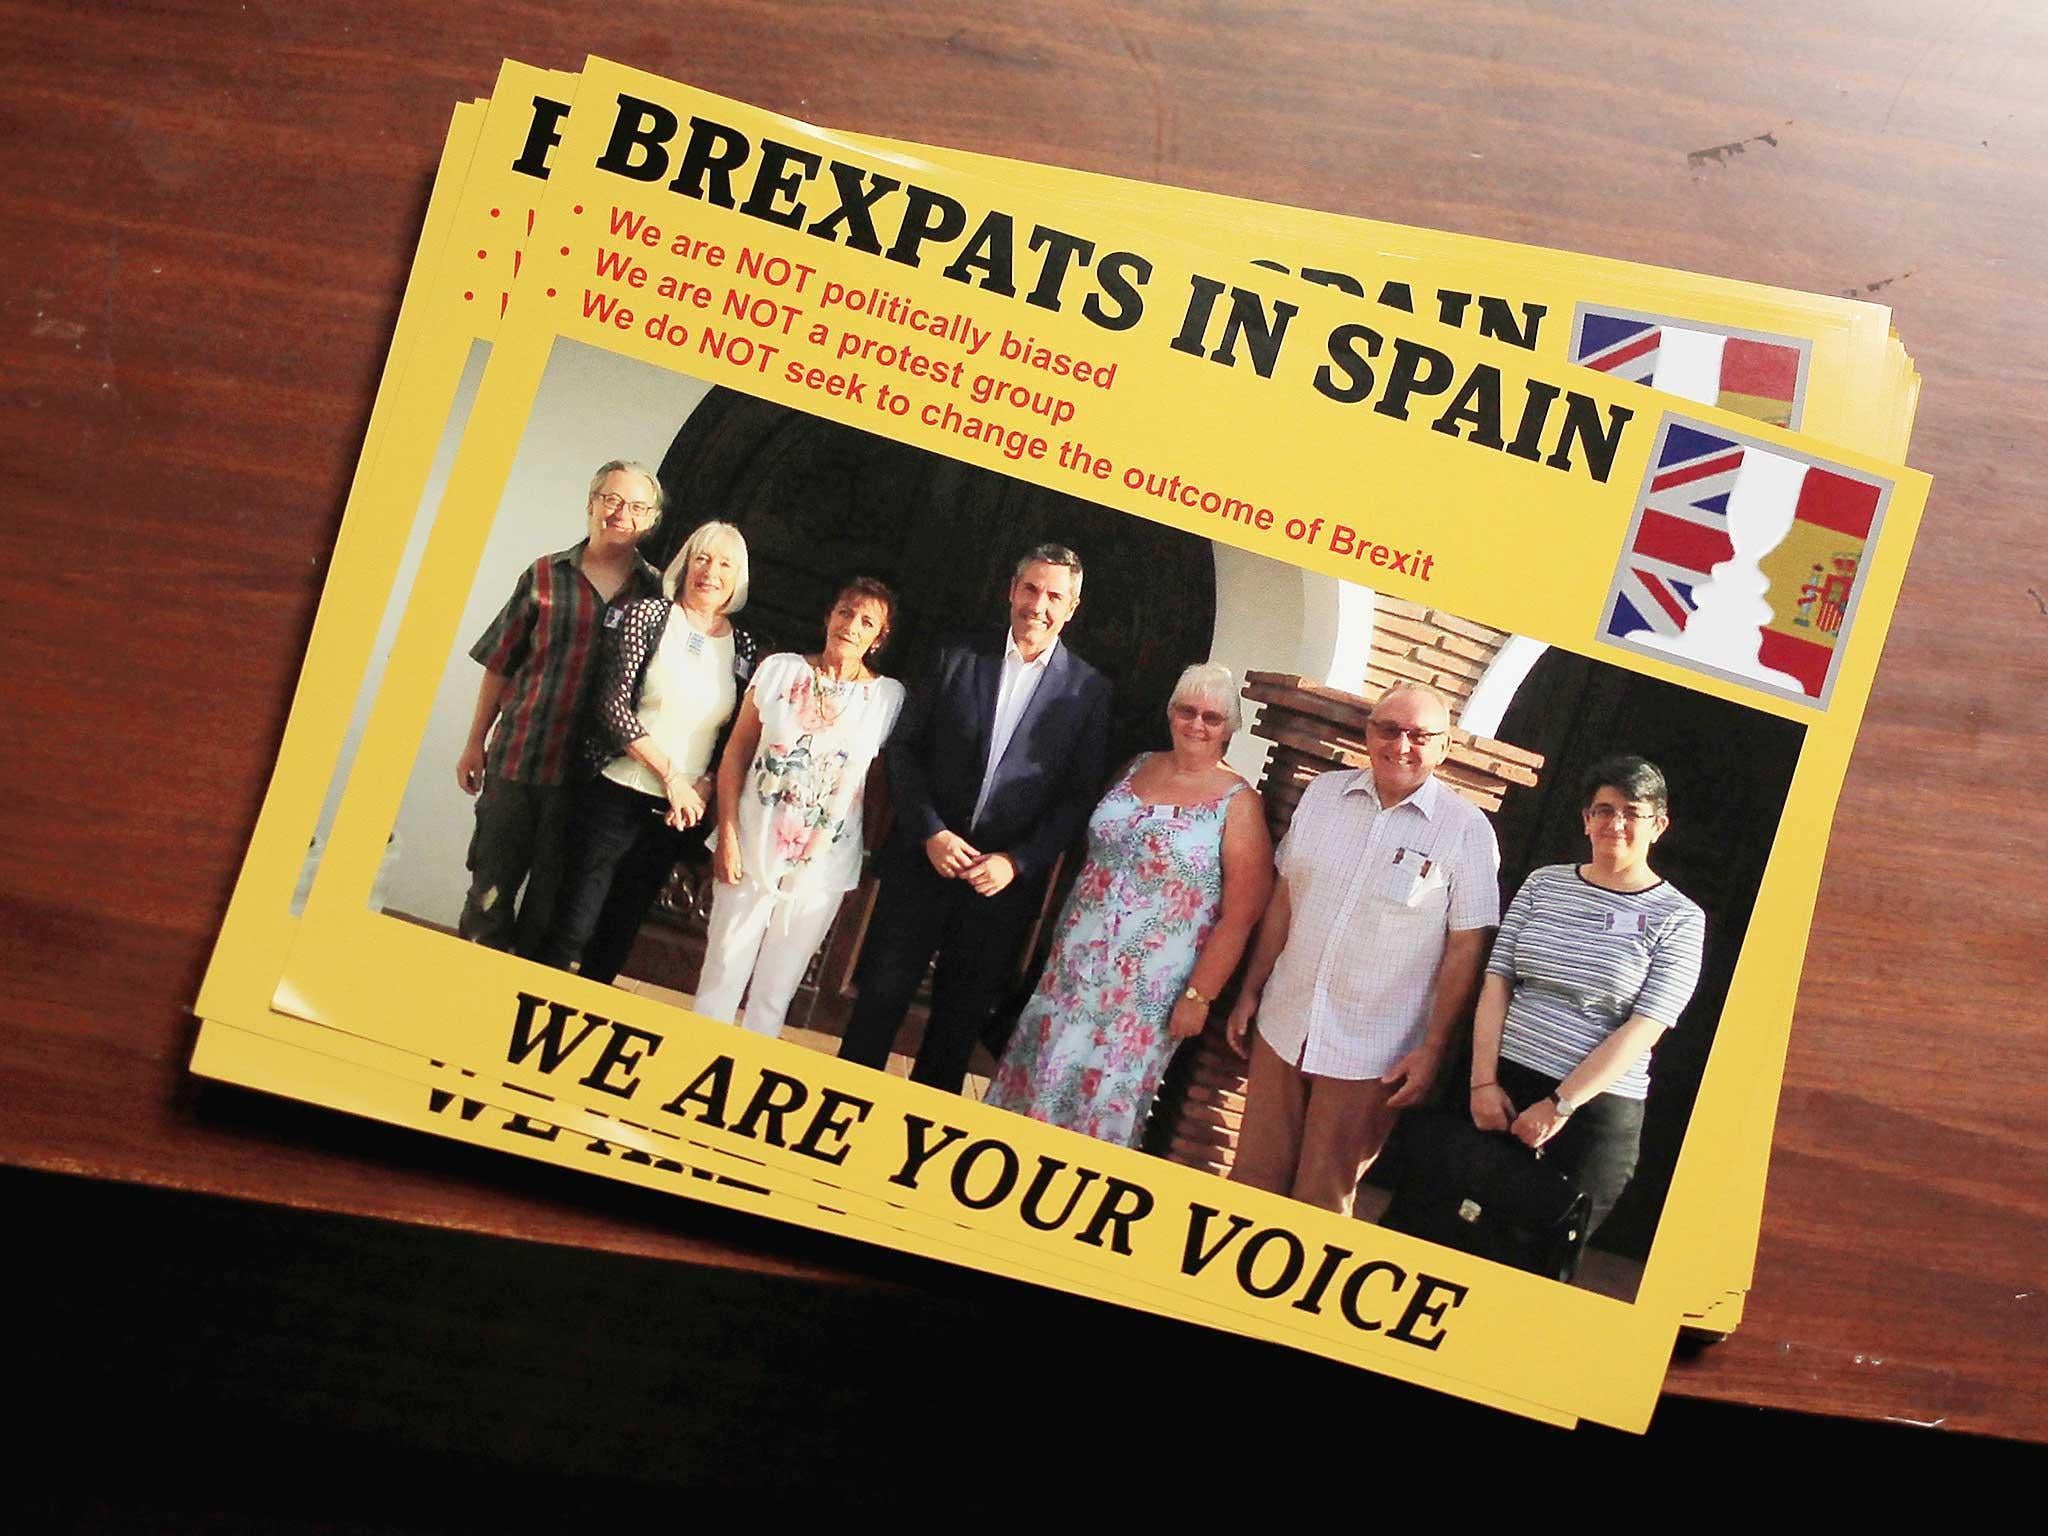 The ‘Brexpats in Spain’ group has formed to help British residents living in Spain understand how they will be affected by Brexit